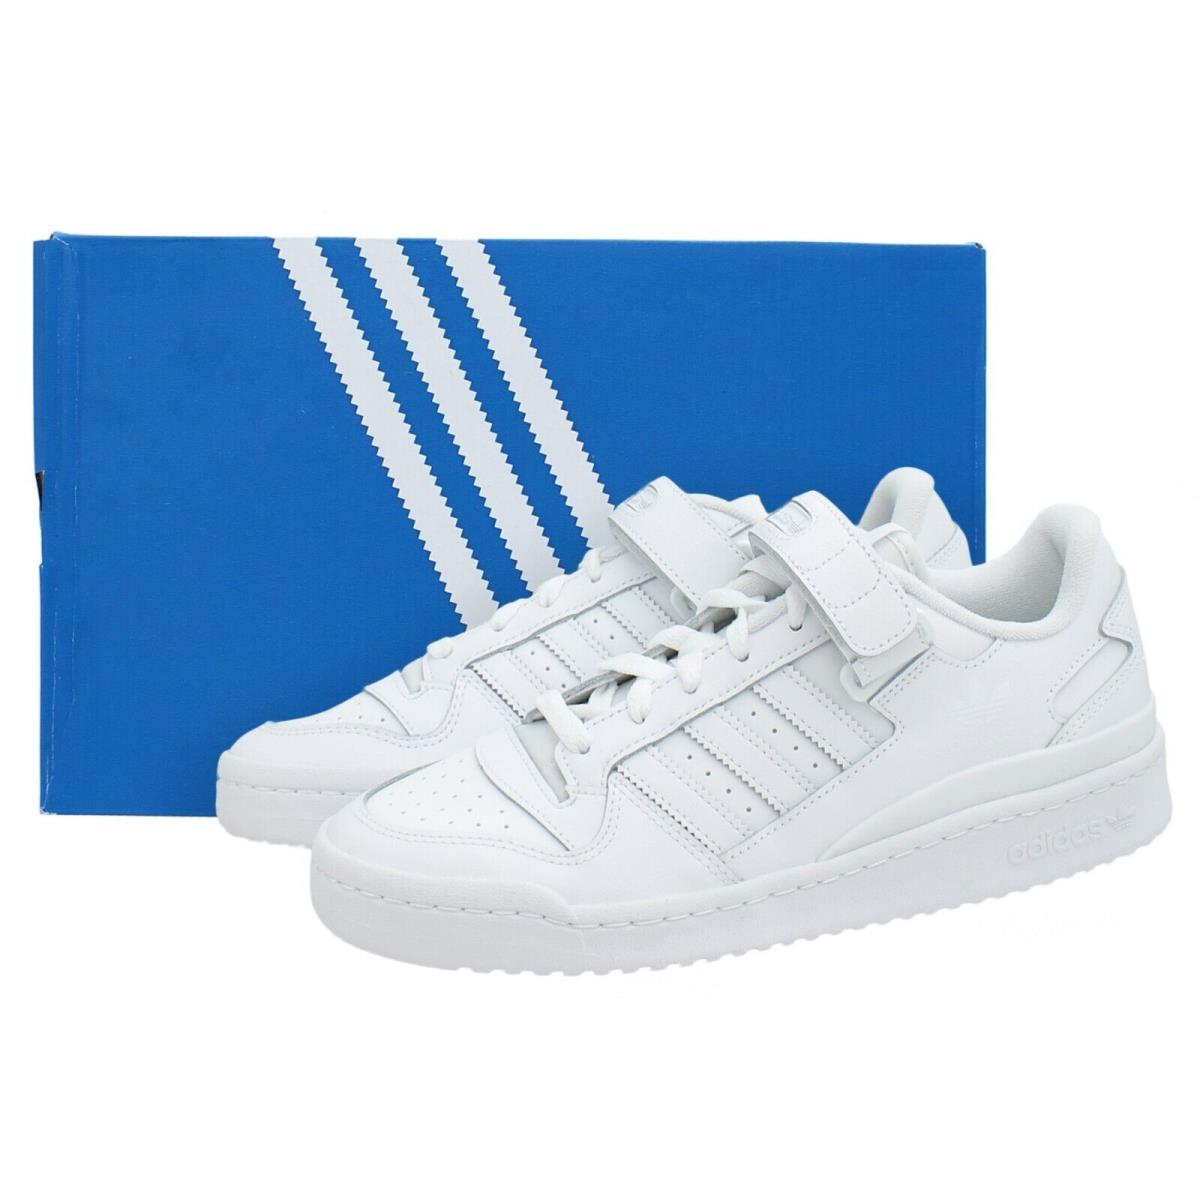 Adidas Men`s Forum Low Sneakers FY7755 Low Top Retro Style Leather Everyday Shoe